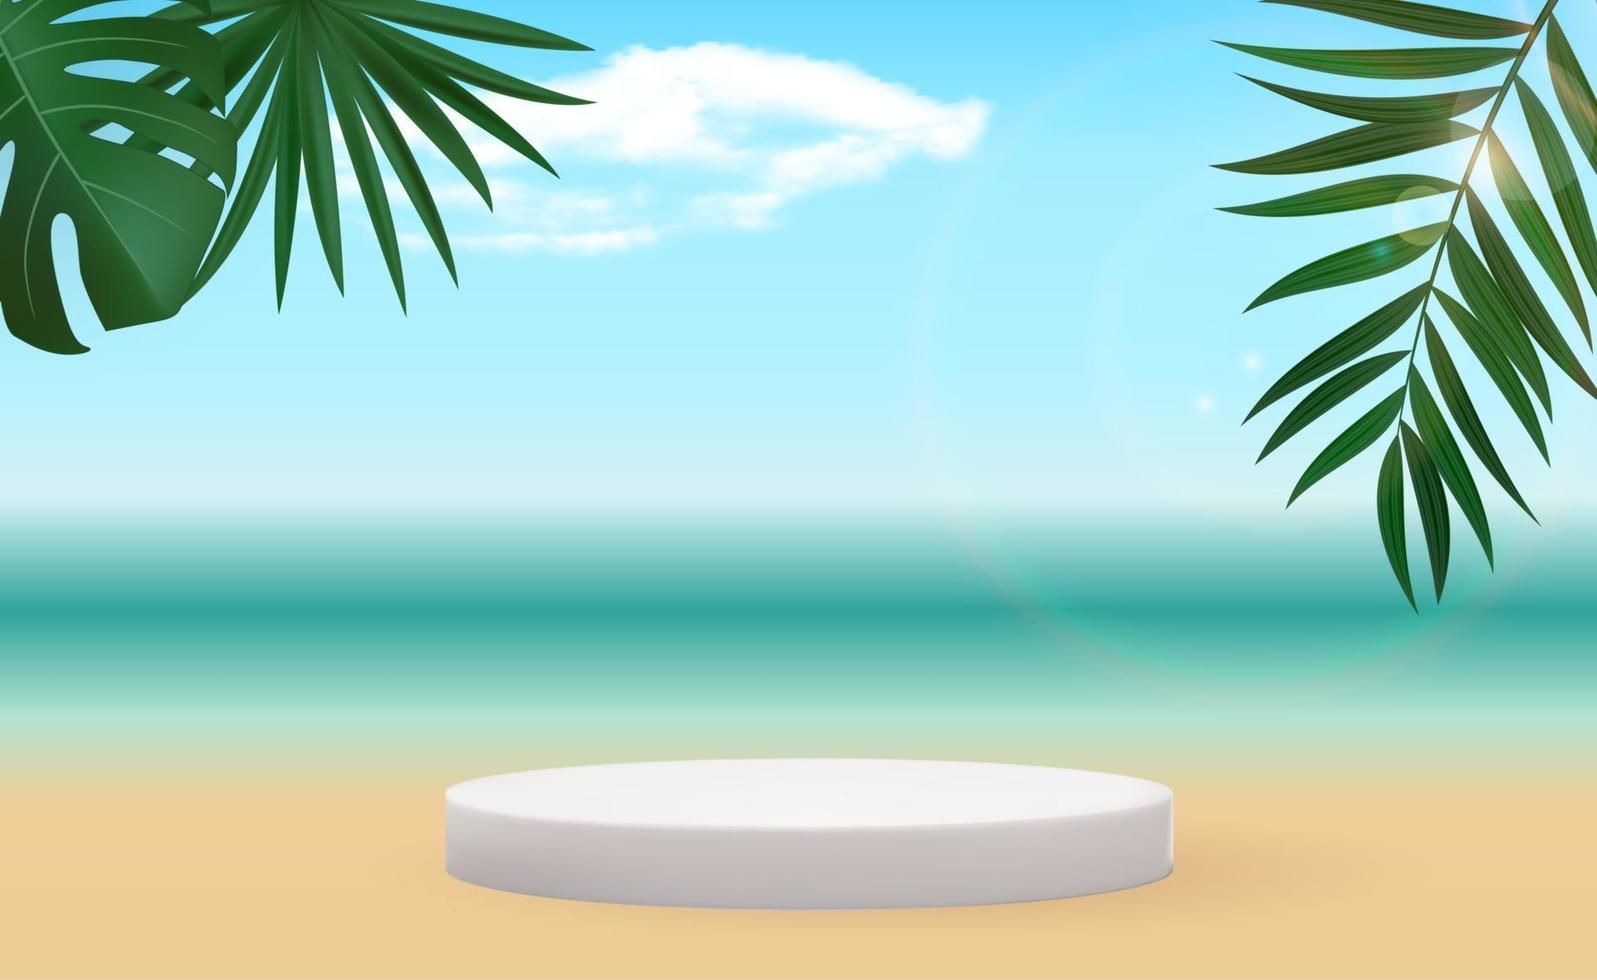 Realistic 3d pedestal over sunny background with palm leaves. vector